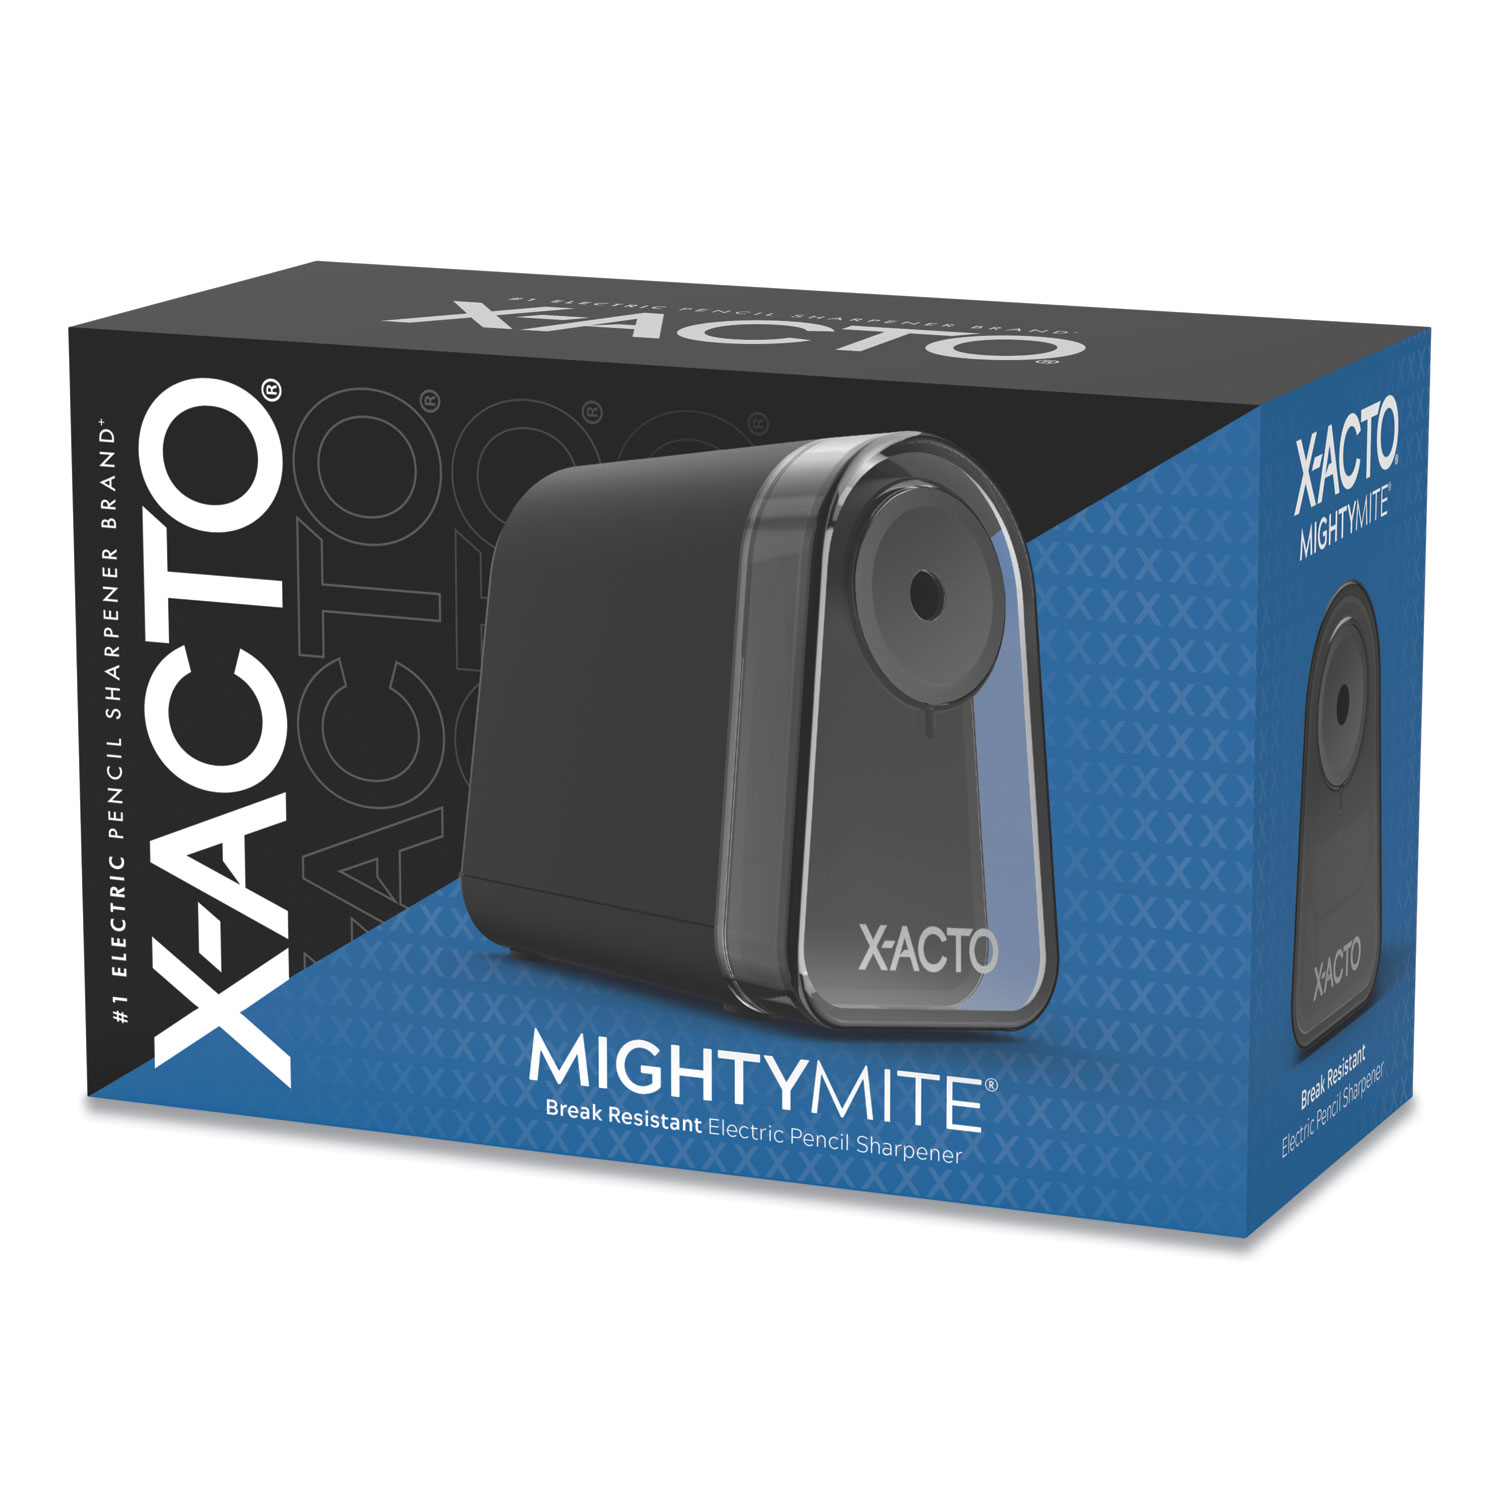 Model 19501 Mighty Mite Home Office Electric Pencil Sharpener, AC-Powered,  3.5 x 5.5 x 4.5, Black/Gray/Smoke - Pointer Office Products